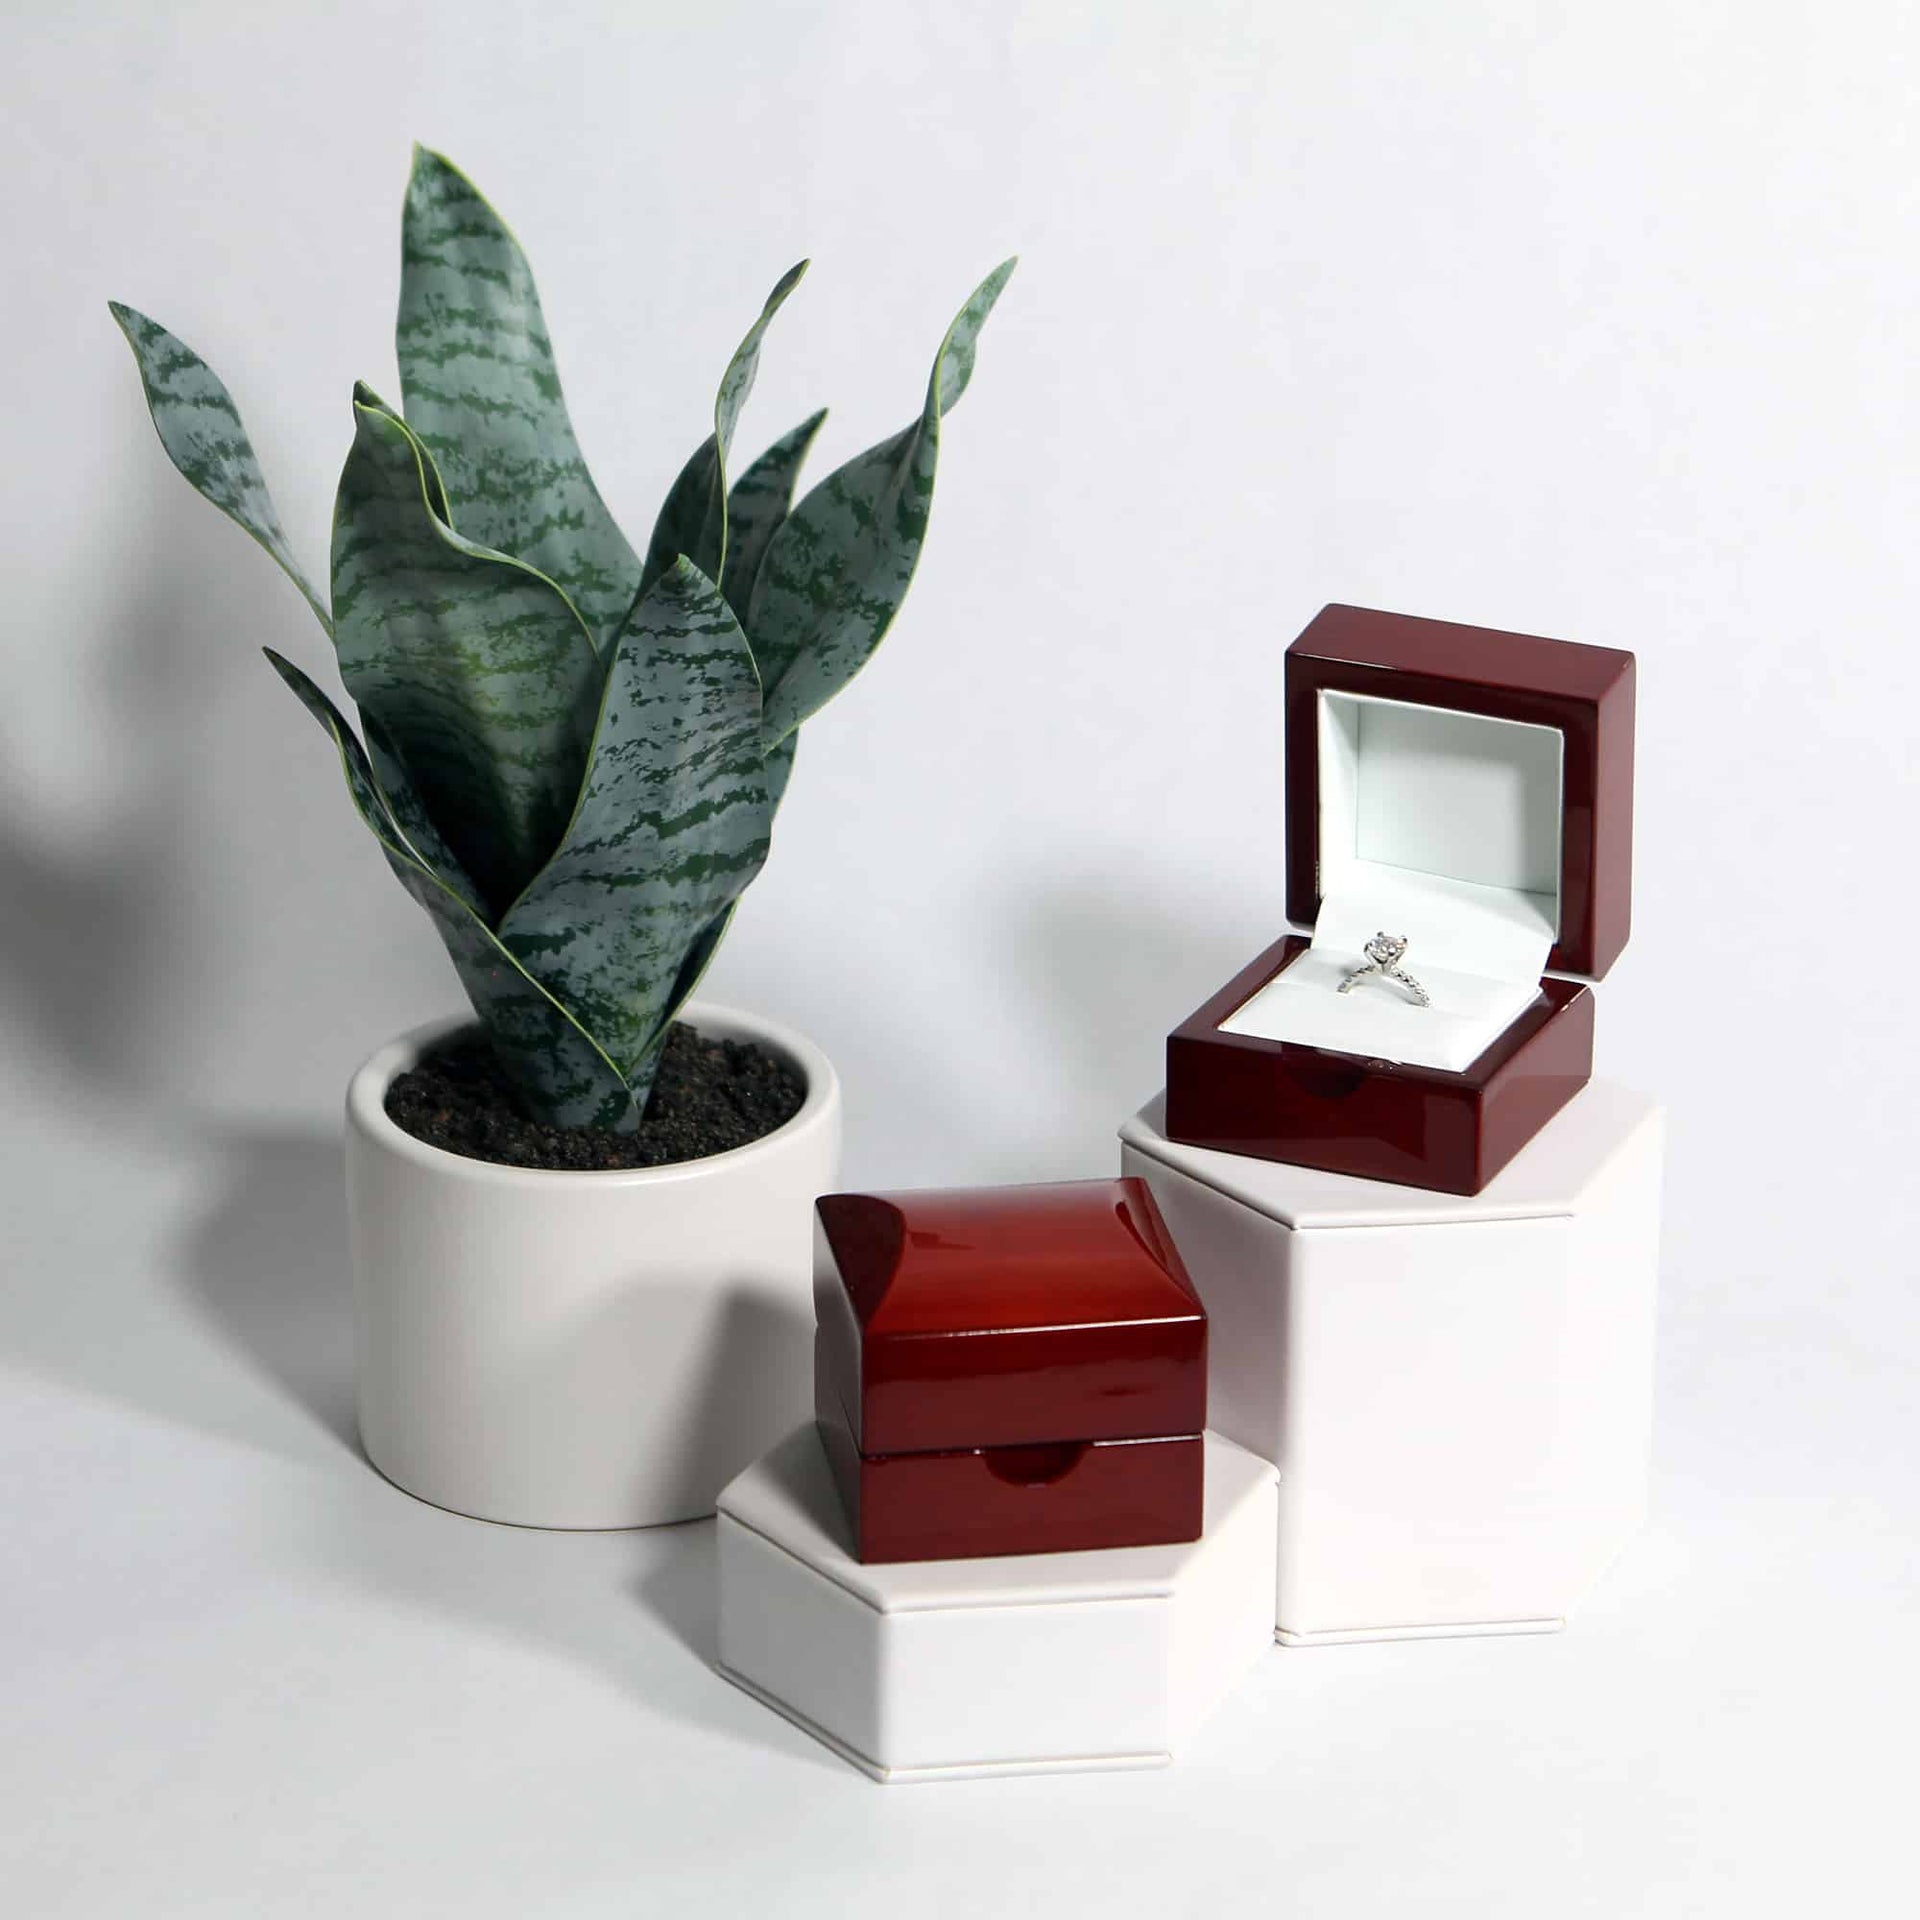 lifestyle of red rosewood ring boxes on hexagon bases with a snake plant in the shot